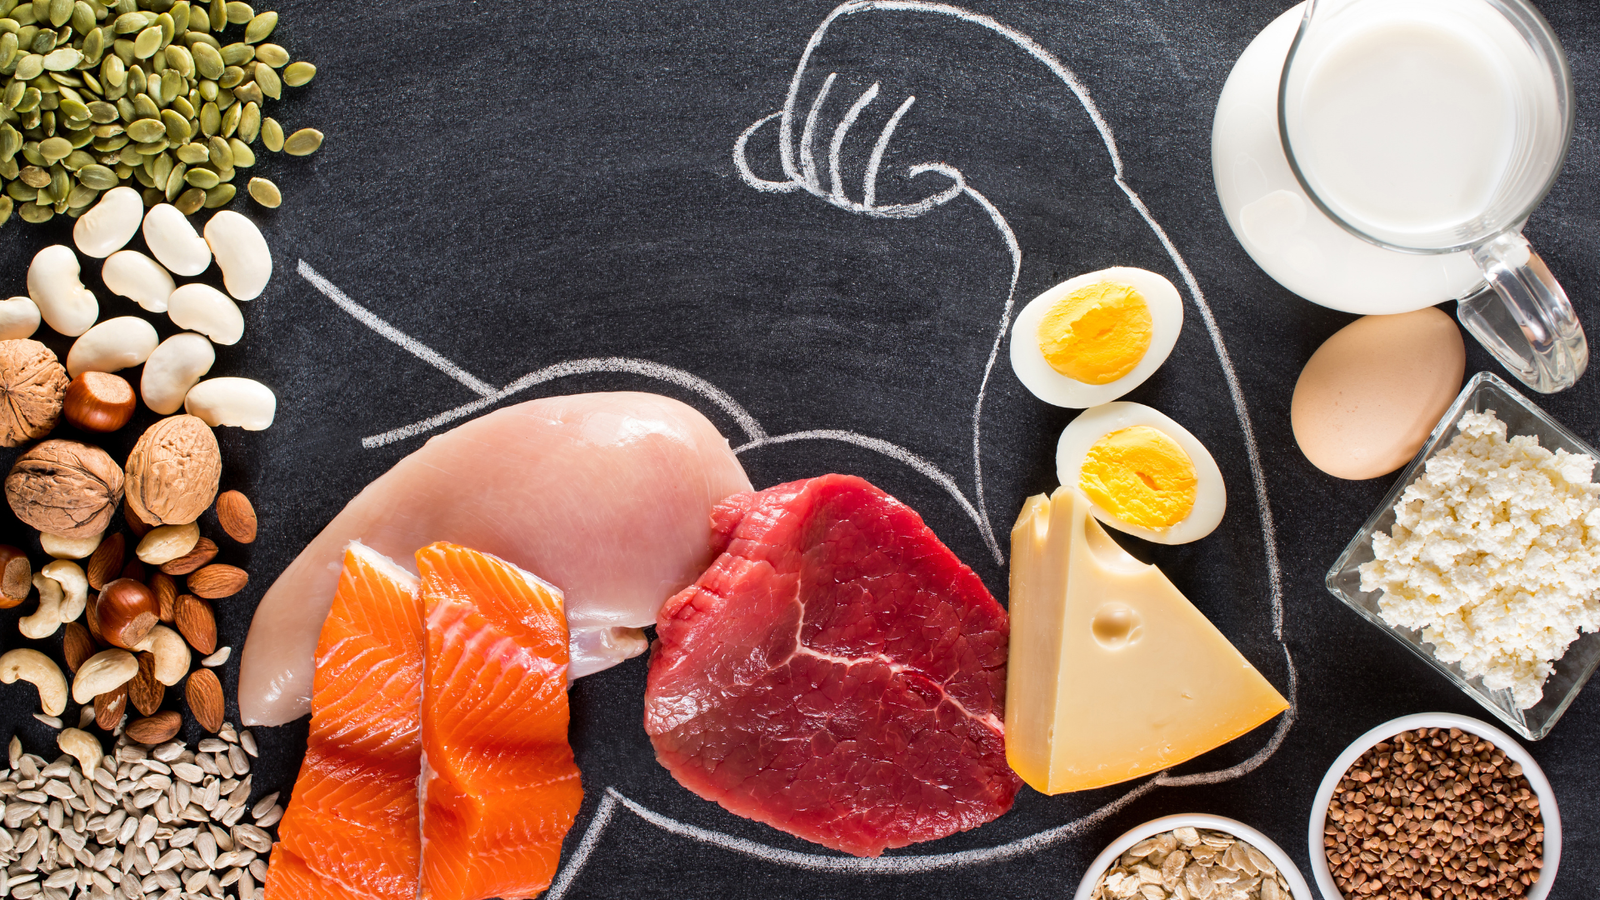 11 UNIQUE HIGH-PROTEIN FOODS WORTH TRYING, ACCORDING TO A DIETITIAN